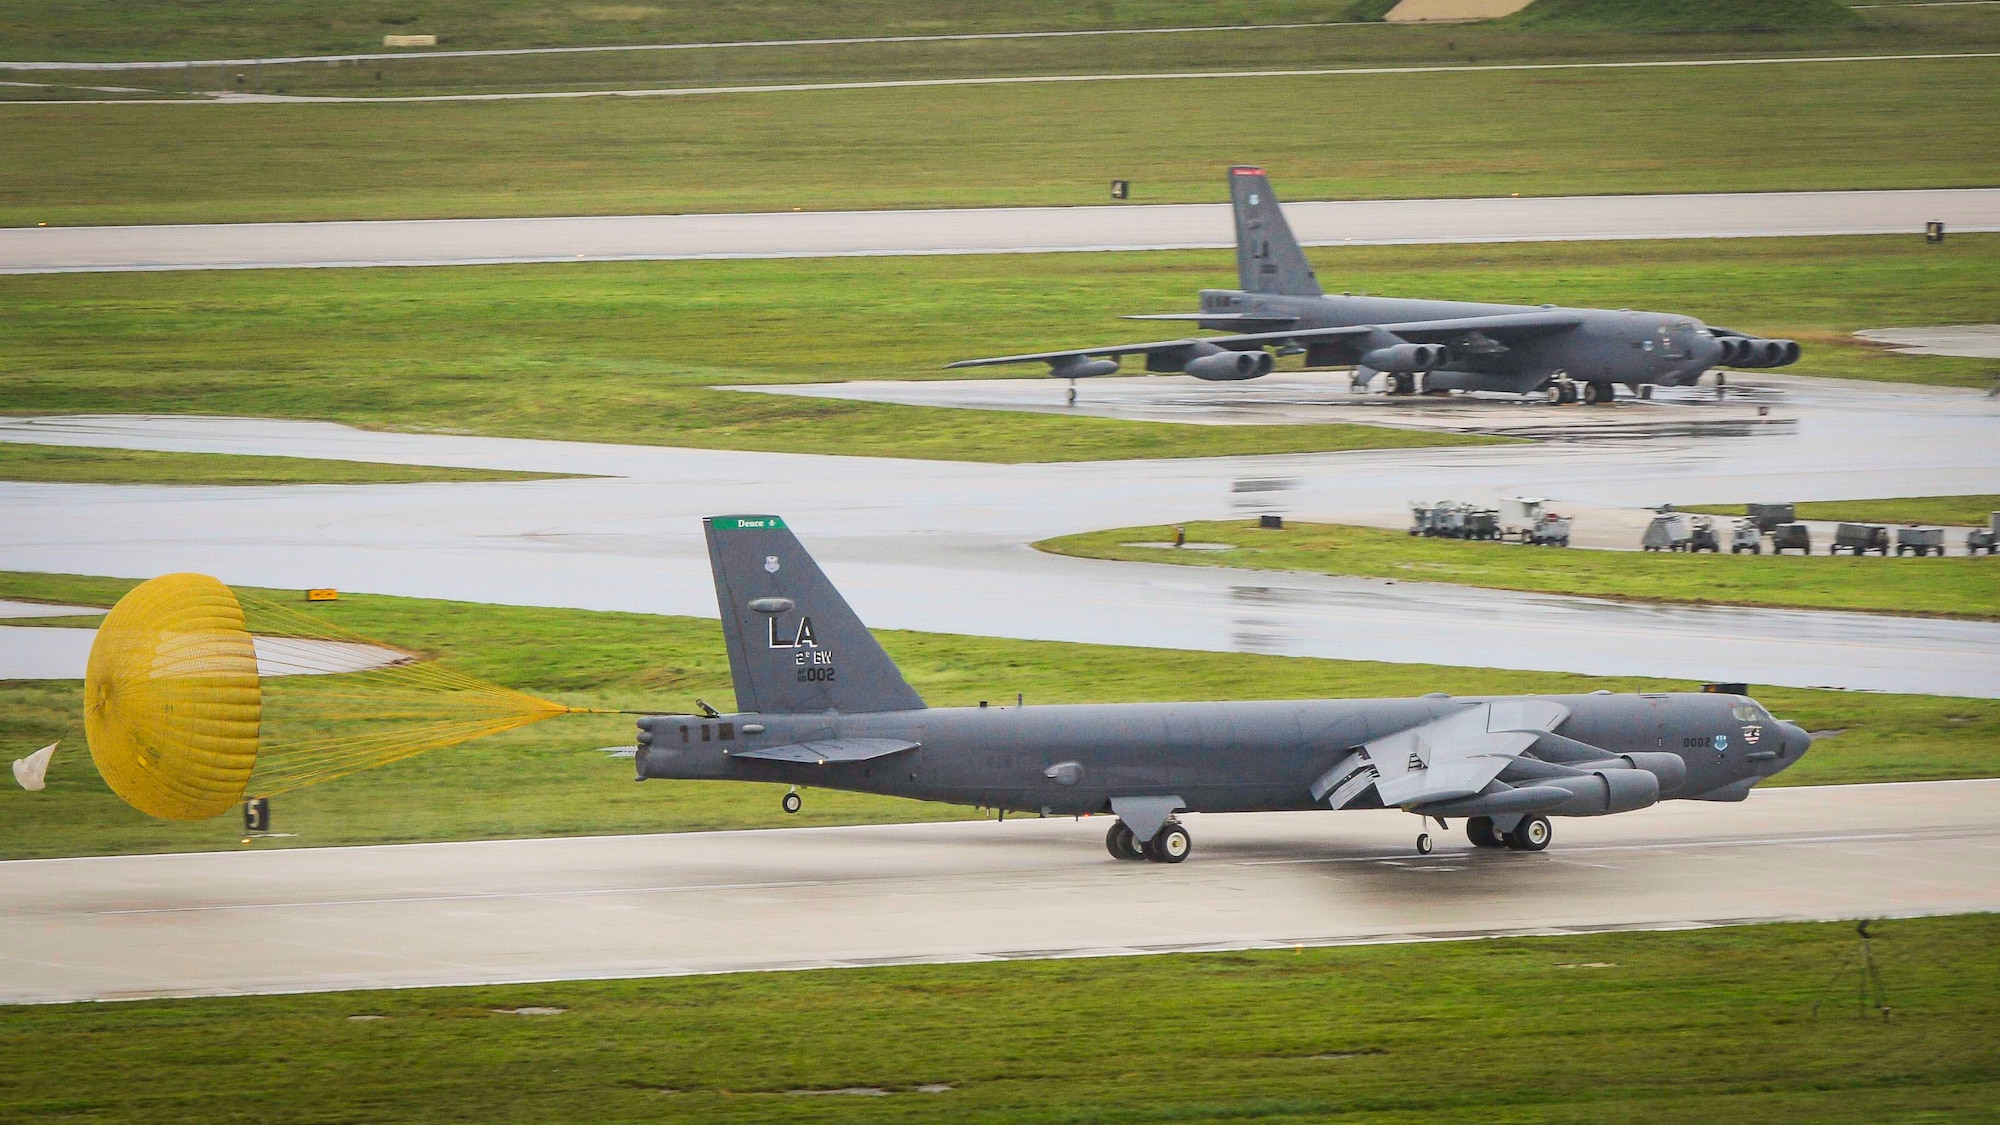 A U.S. Air Force B-52 Stratofortress strategic bomber with the 20th Bomb Squadron, operating under the tactical control of the 36th Operations Group, lands at Andersen Air Force Base, Guam, during Valiant Shield 2014, Sept. 16, 2014. Valiant Shield is a U.S.-only exercise, integrating U.S. Navy, Air Force, U.S. Army and U.S. Marine Corps assets, offering real-world joint operational experience to develop capabilities that provide a full range of options to defend U.S. interests and those of its allies and partners. (U.S. Marine Photo by Lance Cpl. Abbey Perria/Released)